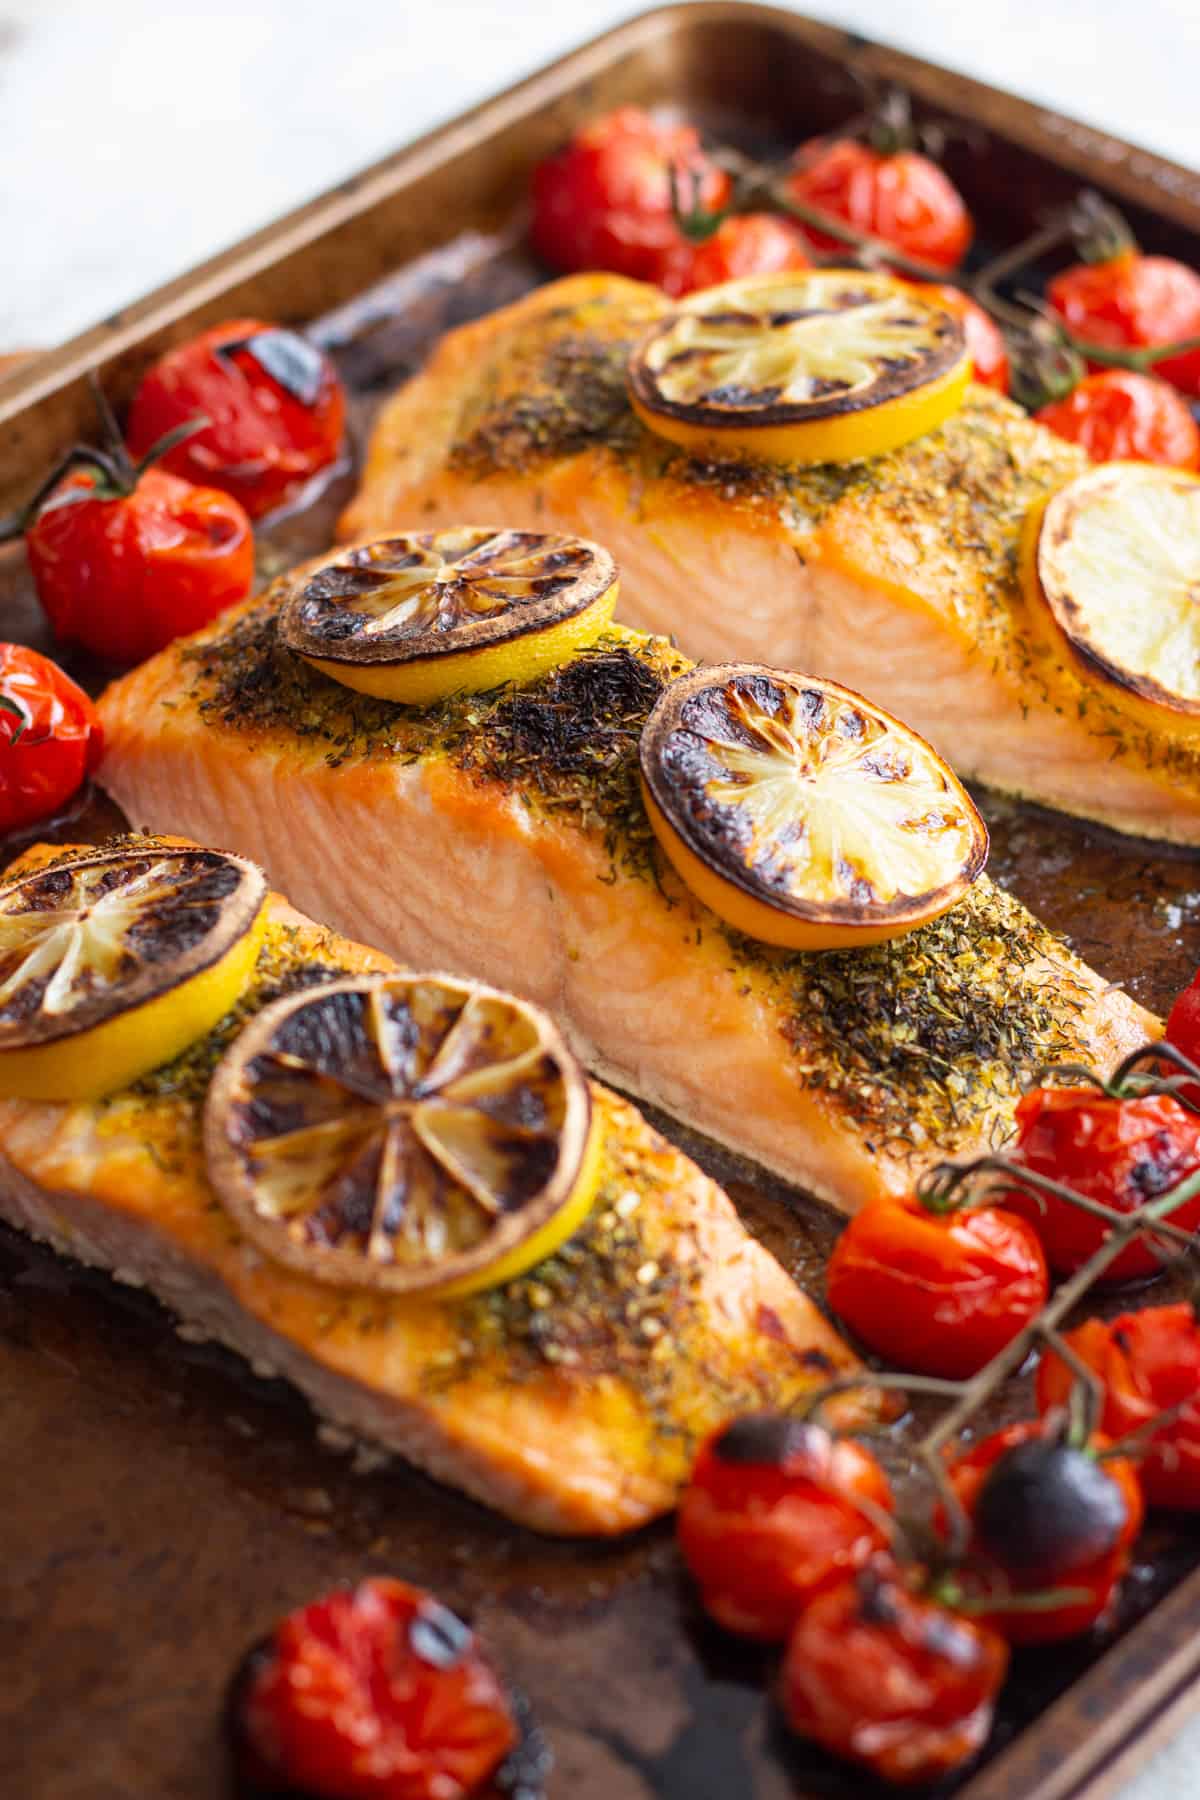 You can make this delicious spiced broiled salmon recipe in less than 15 minutes. Broiling is the way to go for a fast, tasty and satisfying salmon dinner!